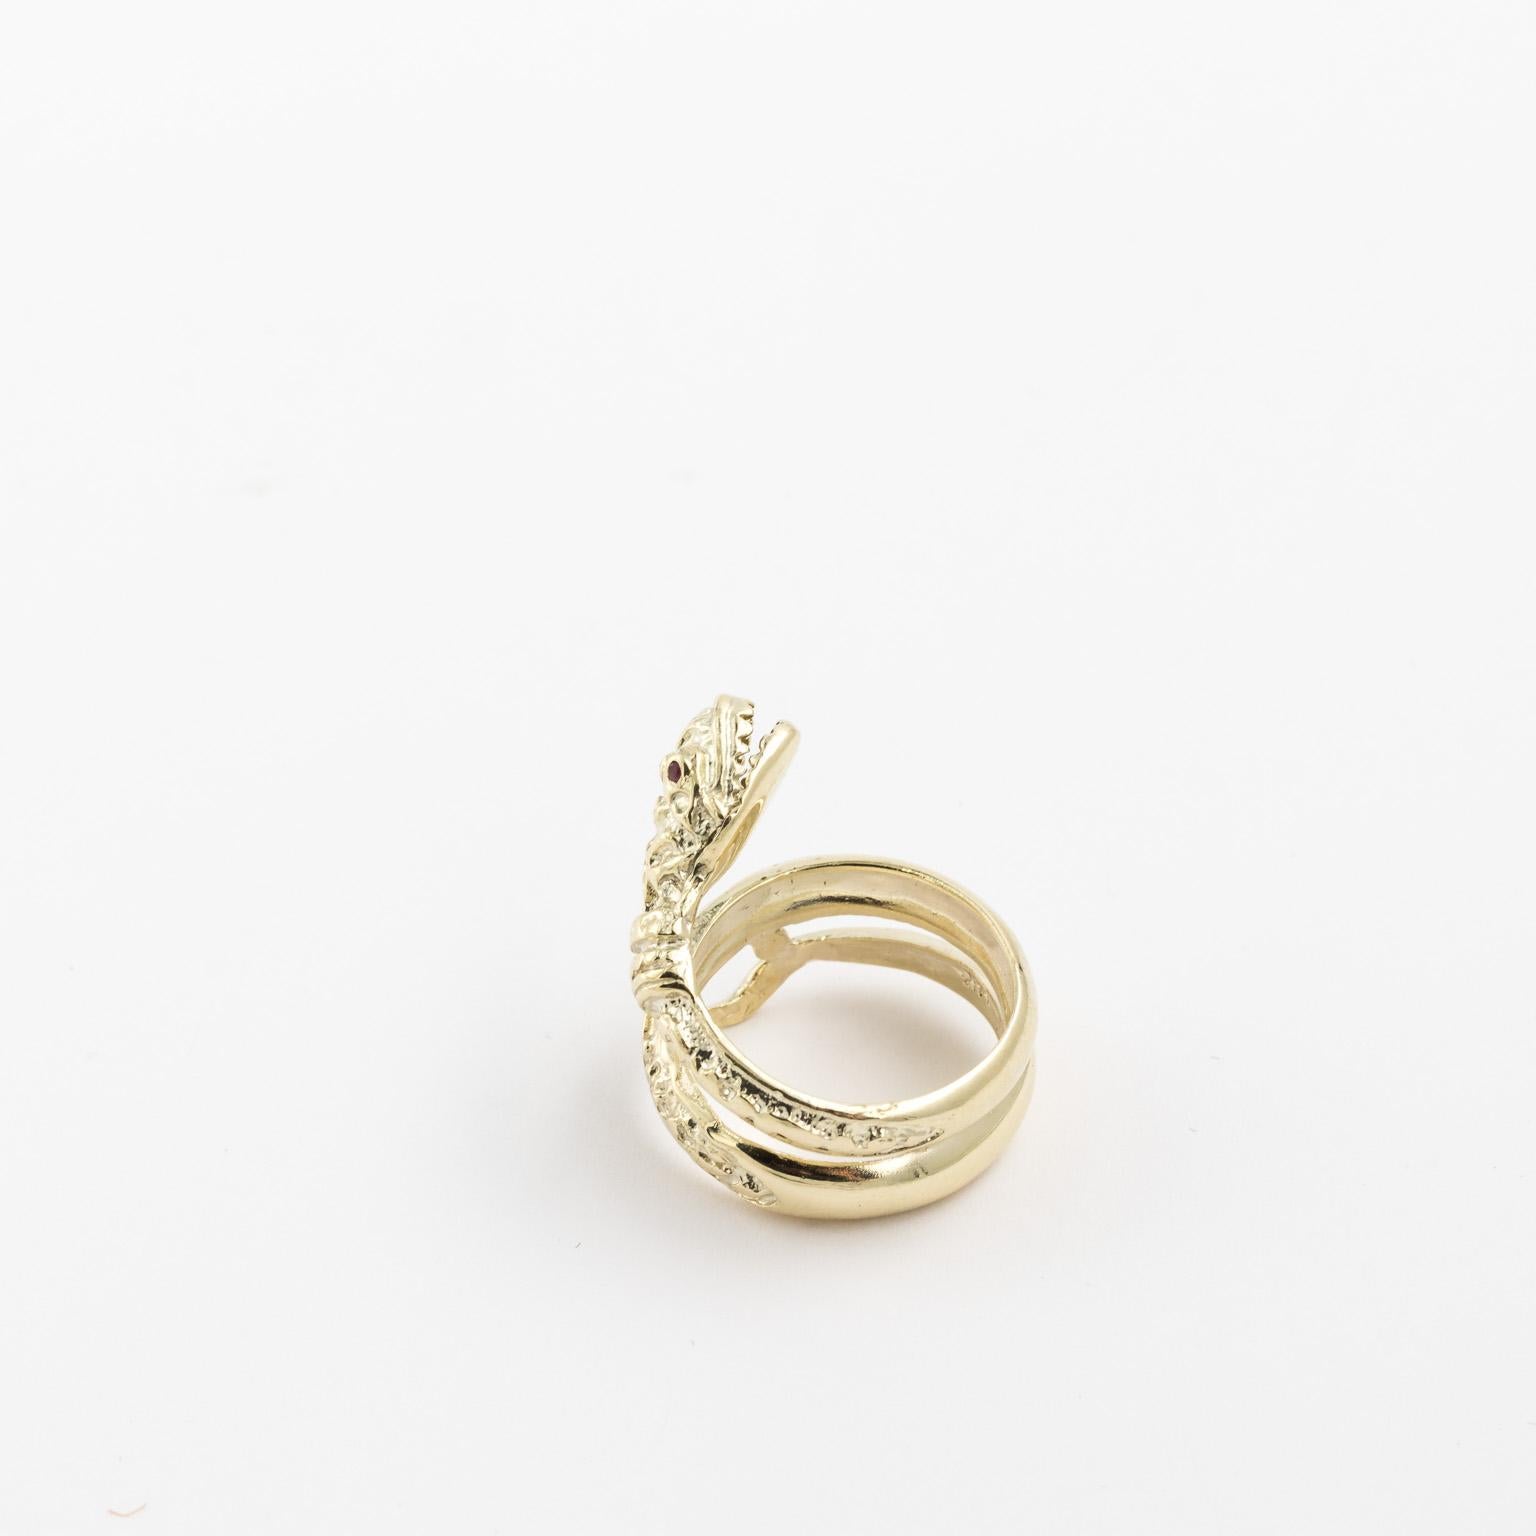 Striking 14 Karat Yellow Gold Double Wrap Coiled Snake Ring with Ruby Eyes In Good Condition For Sale In St.amford, CT